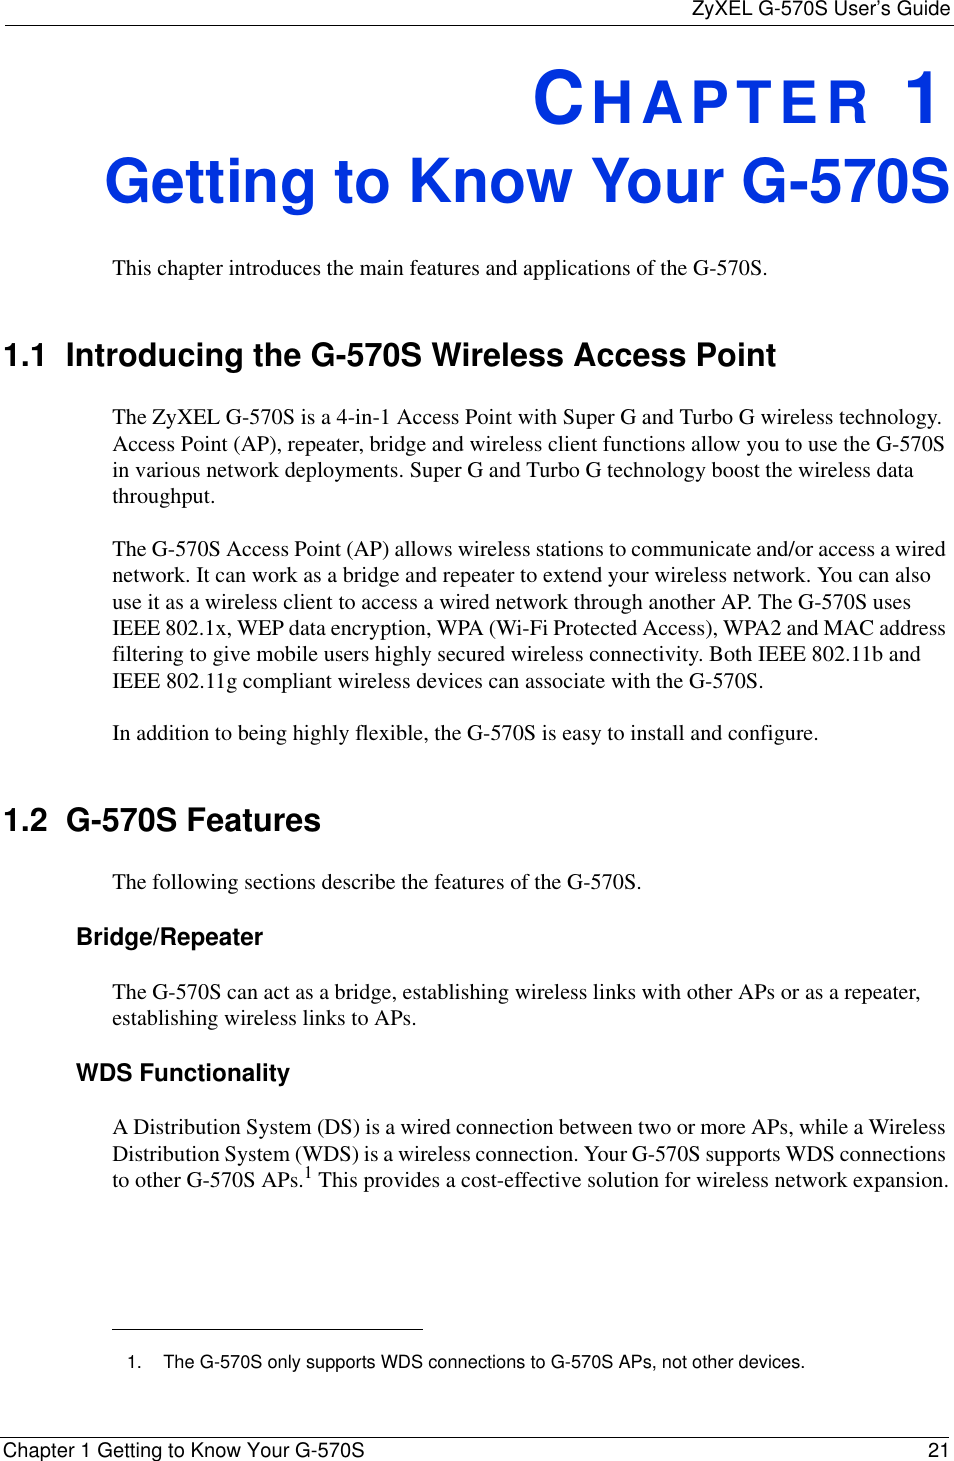 ZyXEL G-570S User’s GuideChapter 1 Getting to Know Your G-570S 21CHAPTER 1Getting to Know Your G-570SThis chapter introduces the main features and applications of the G-570S.1.1  Introducing the G-570S Wireless Access PointThe ZyXEL G-570S is a 4-in-1 Access Point with Super G and Turbo G wireless technology. Access Point (AP), repeater, bridge and wireless client functions allow you to use the G-570S in various network deployments. Super G and Turbo G technology boost the wireless data throughput.The G-570S Access Point (AP) allows wireless stations to communicate and/or access a wired network. It can work as a bridge and repeater to extend your wireless network. You can also use it as a wireless client to access a wired network through another AP. The G-570S uses IEEE 802.1x, WEP data encryption, WPA (Wi-Fi Protected Access), WPA2 and MAC address filtering to give mobile users highly secured wireless connectivity. Both IEEE 802.11b and IEEE 802.11g compliant wireless devices can associate with the G-570S.In addition to being highly flexible, the G-570S is easy to install and configure.1.2  G-570S FeaturesThe following sections describe the features of the G-570S. Bridge/RepeaterThe G-570S can act as a bridge, establishing wireless links with other APs or as a repeater, establishing wireless links to APs.WDS FunctionalityA Distribution System (DS) is a wired connection between two or more APs, while a Wireless Distribution System (WDS) is a wireless connection. Your G-570S supports WDS connections to other G-570S APs.1 This provides a cost-effective solution for wireless network expansion.1. The G-570S only supports WDS connections to G-570S APs, not other devices.